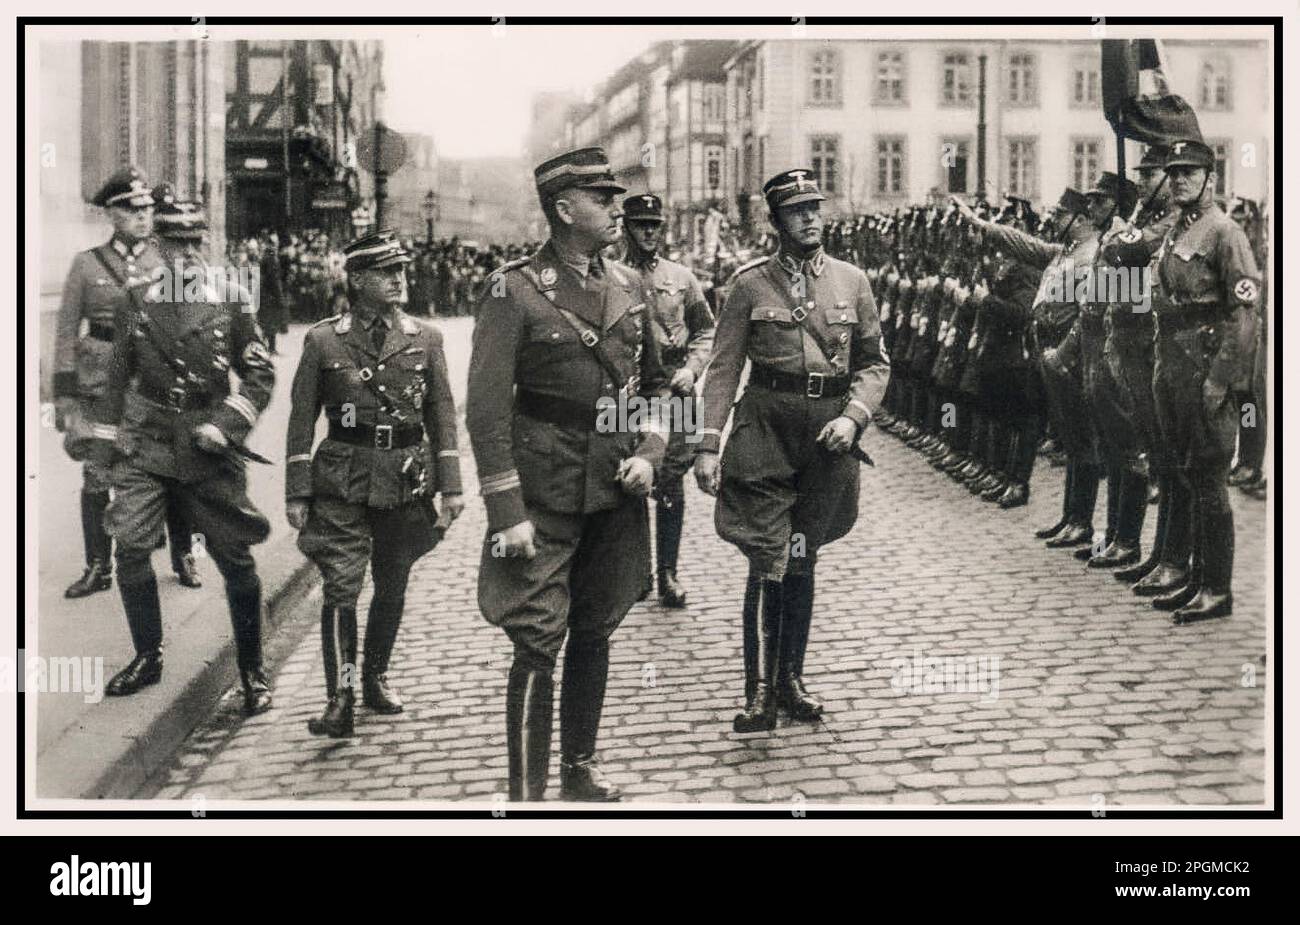 1930s Karl Ernst inpects a parade of Sturmabteilung at a Nazi Parade KARL ERNST Nazi Germany. Karl Ernst was an SA-Gruppenführer who, in early 1933, was the SA leader in Berlin. Prior to joining the Nazi Party, he had been a hotel bellboy and a bouncer at a gay nightclub. He was one of the chief participants in the extrajudicial murder of Albrecht Höhler. Stock Photo